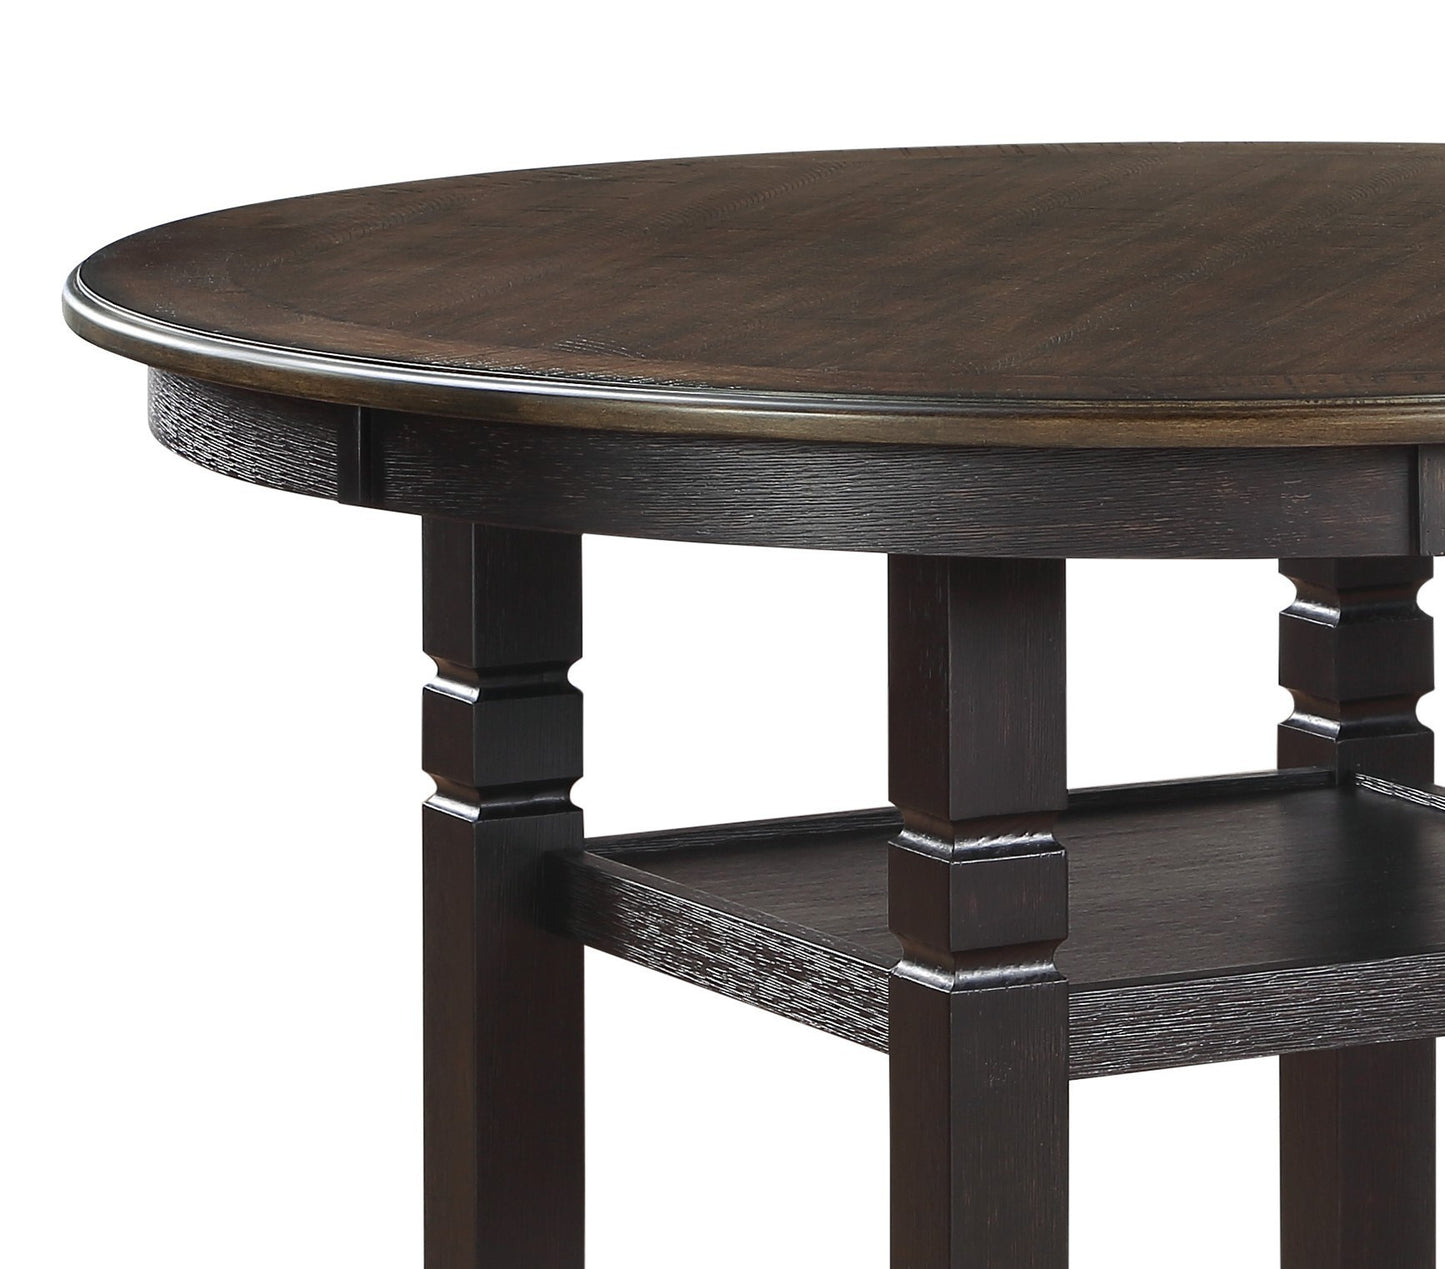 Asher 5-Piece Dining Table